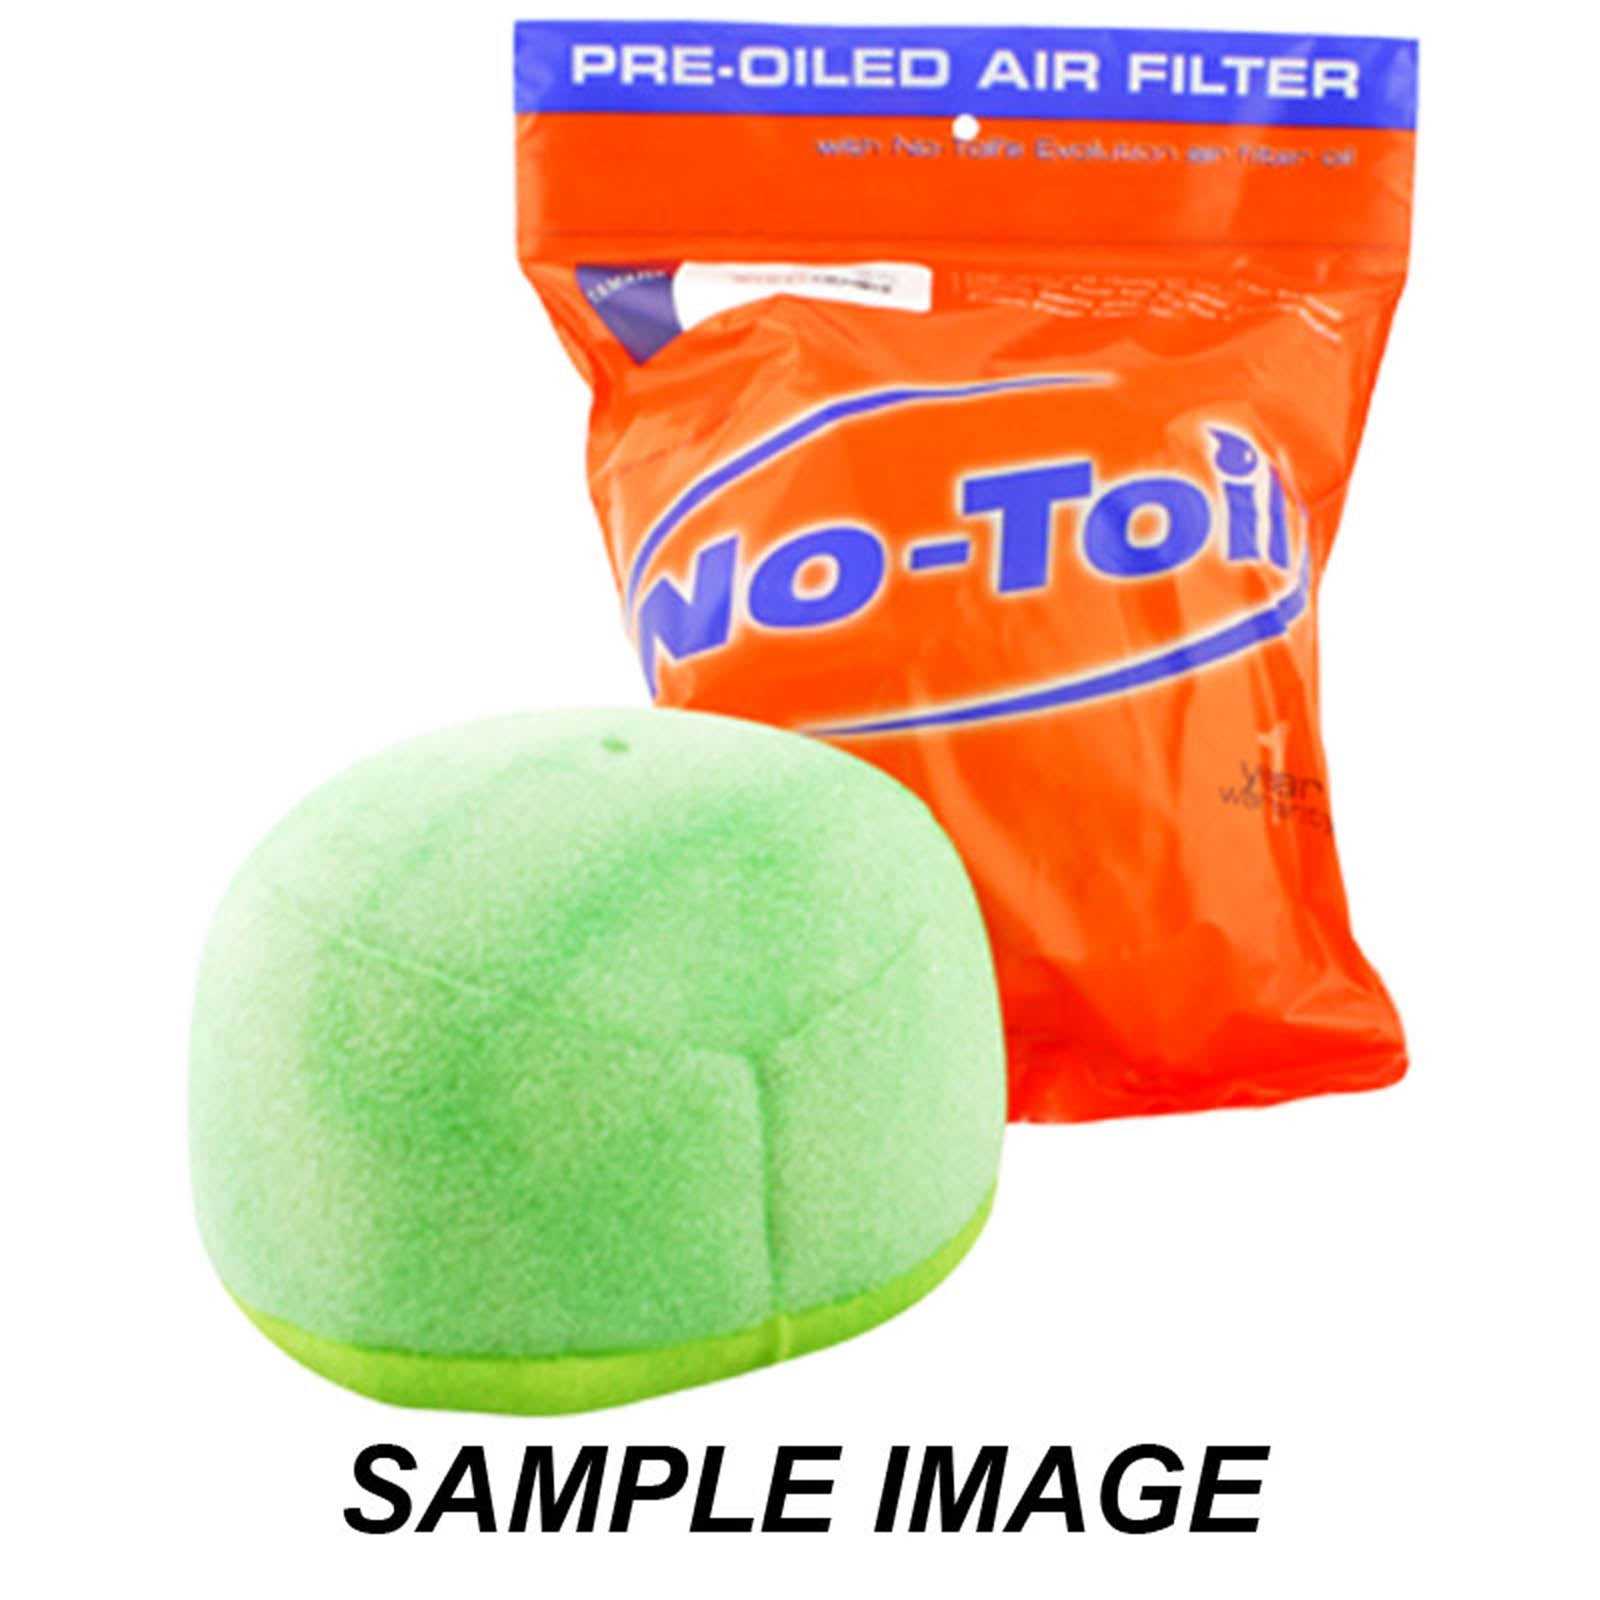 No-Toil, PRE-OILED FILTER HON CRF450R 09-12